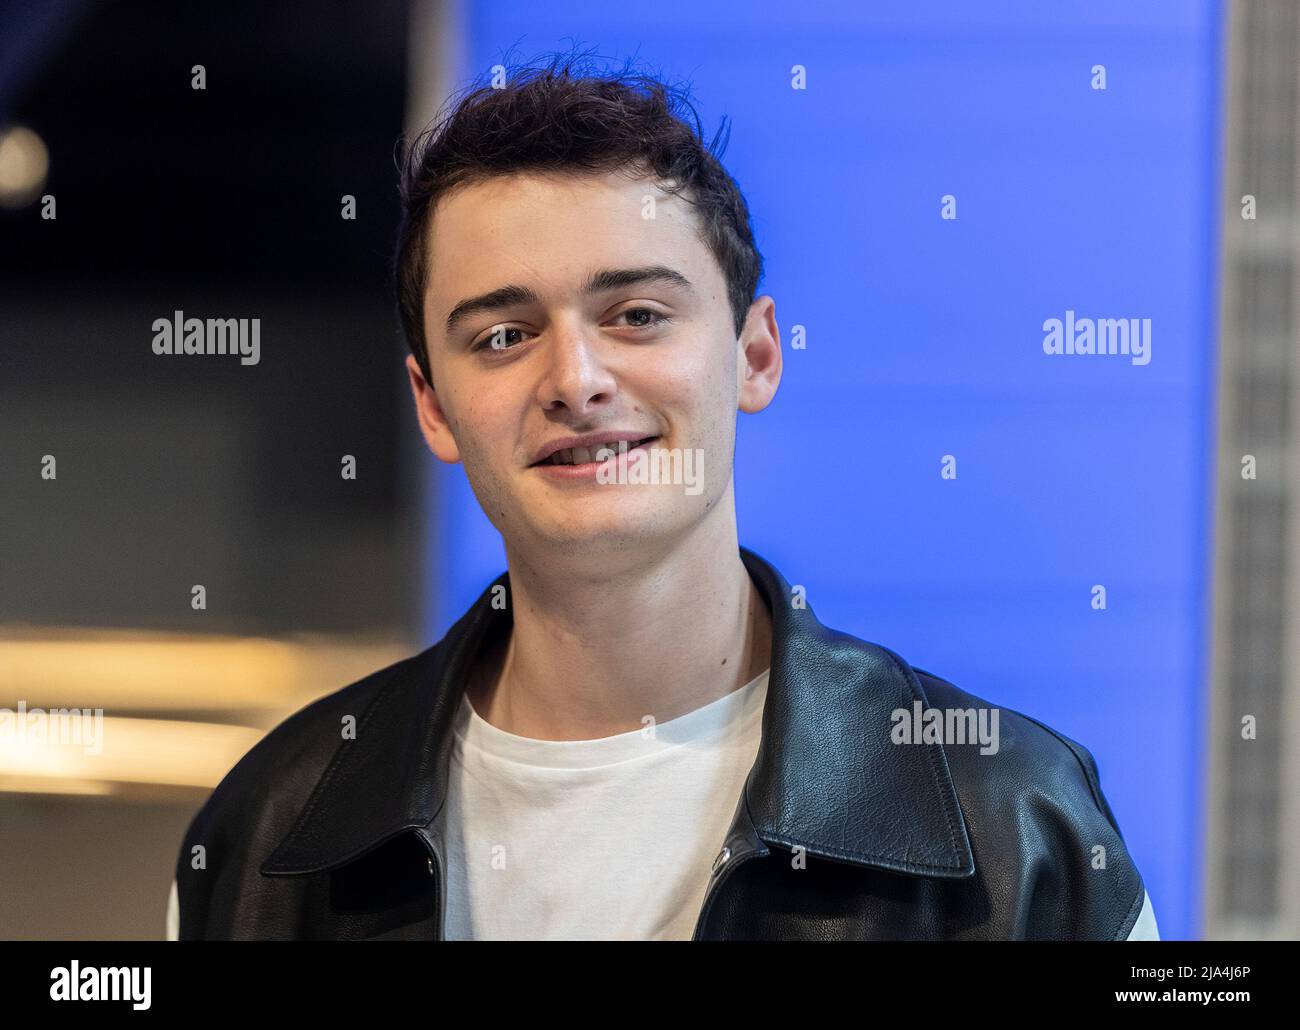 New York, United States. 26th May, 2022. Noah Schnapp from Stranger Things attends ceremonial lighting of Empire State Building ahead of global event for season 4 premiere. (Photo by Lev Radin/Pacific Press) Credit: Pacific Press Media Production Corp./Alamy Live News Stock Photo